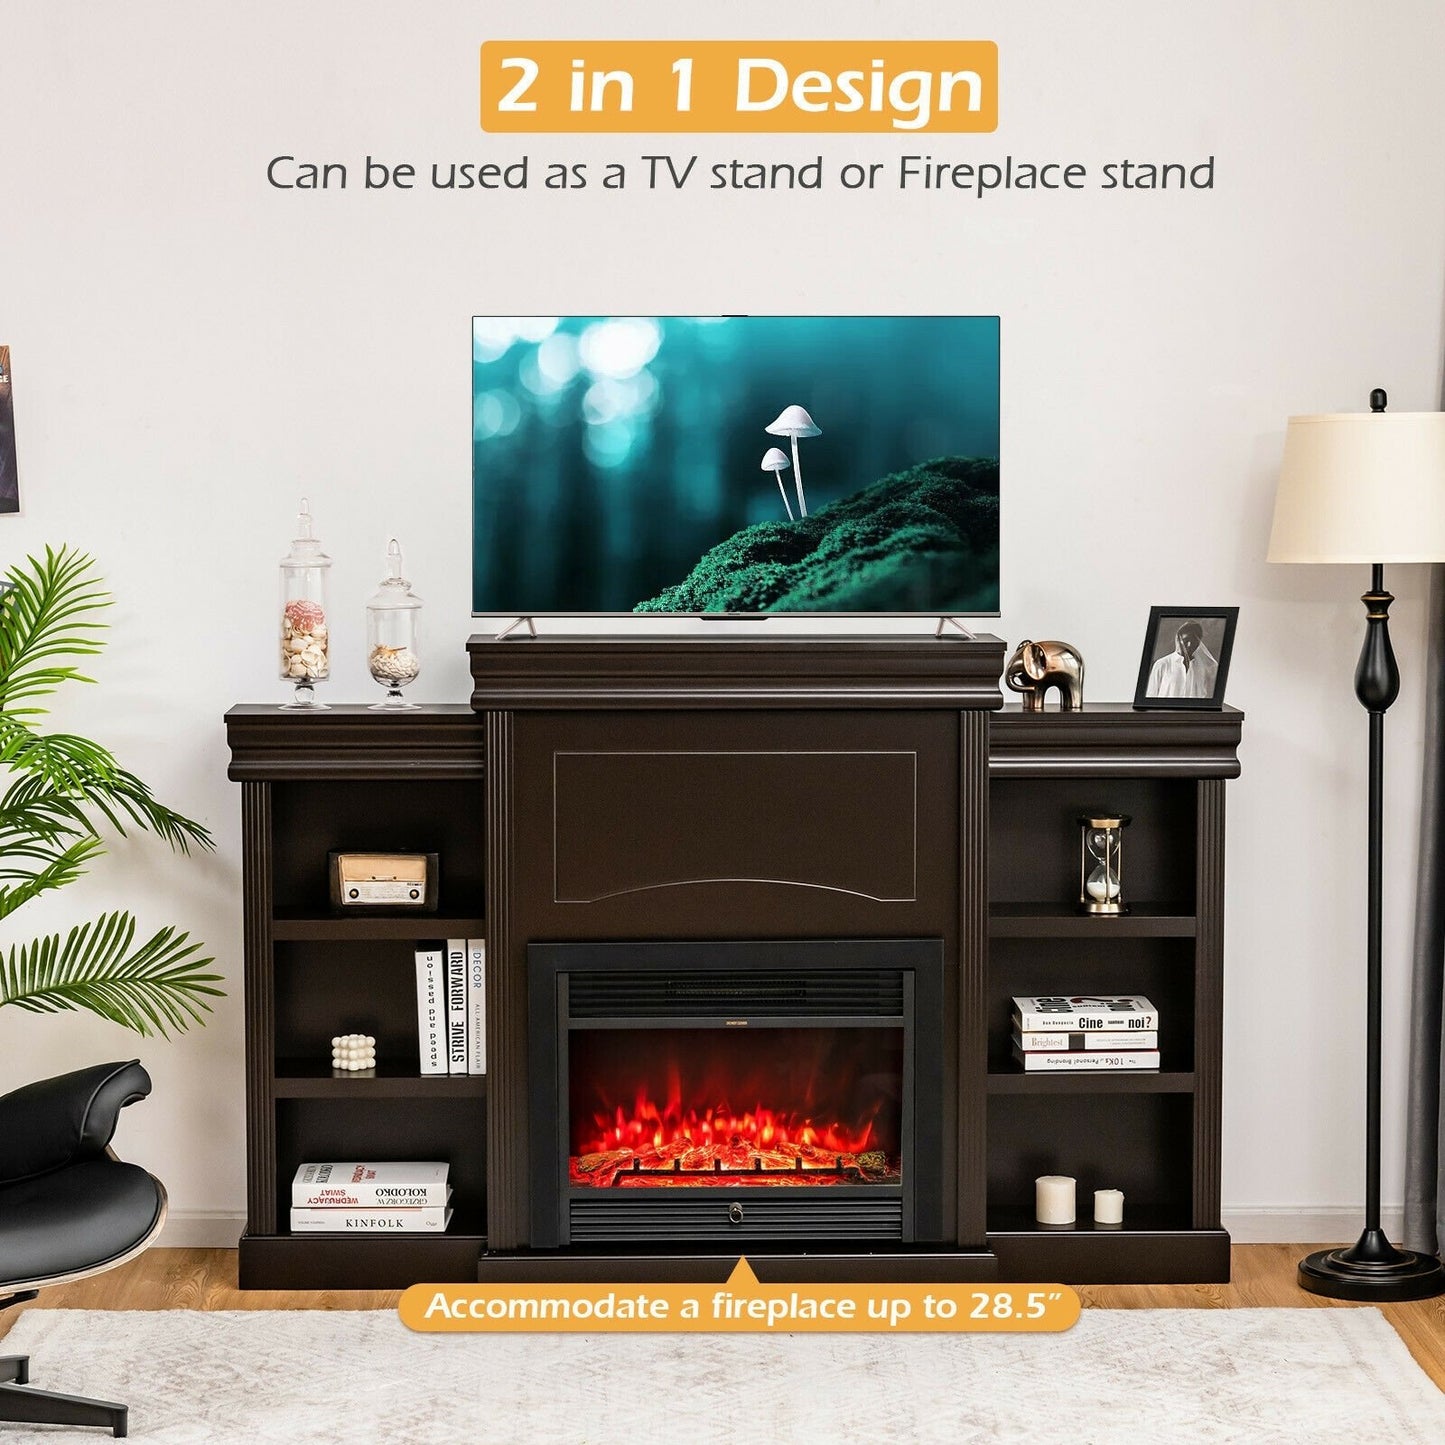 70 Inch Modern Fireplace Media Entertainment Center with Bookcase, Brown